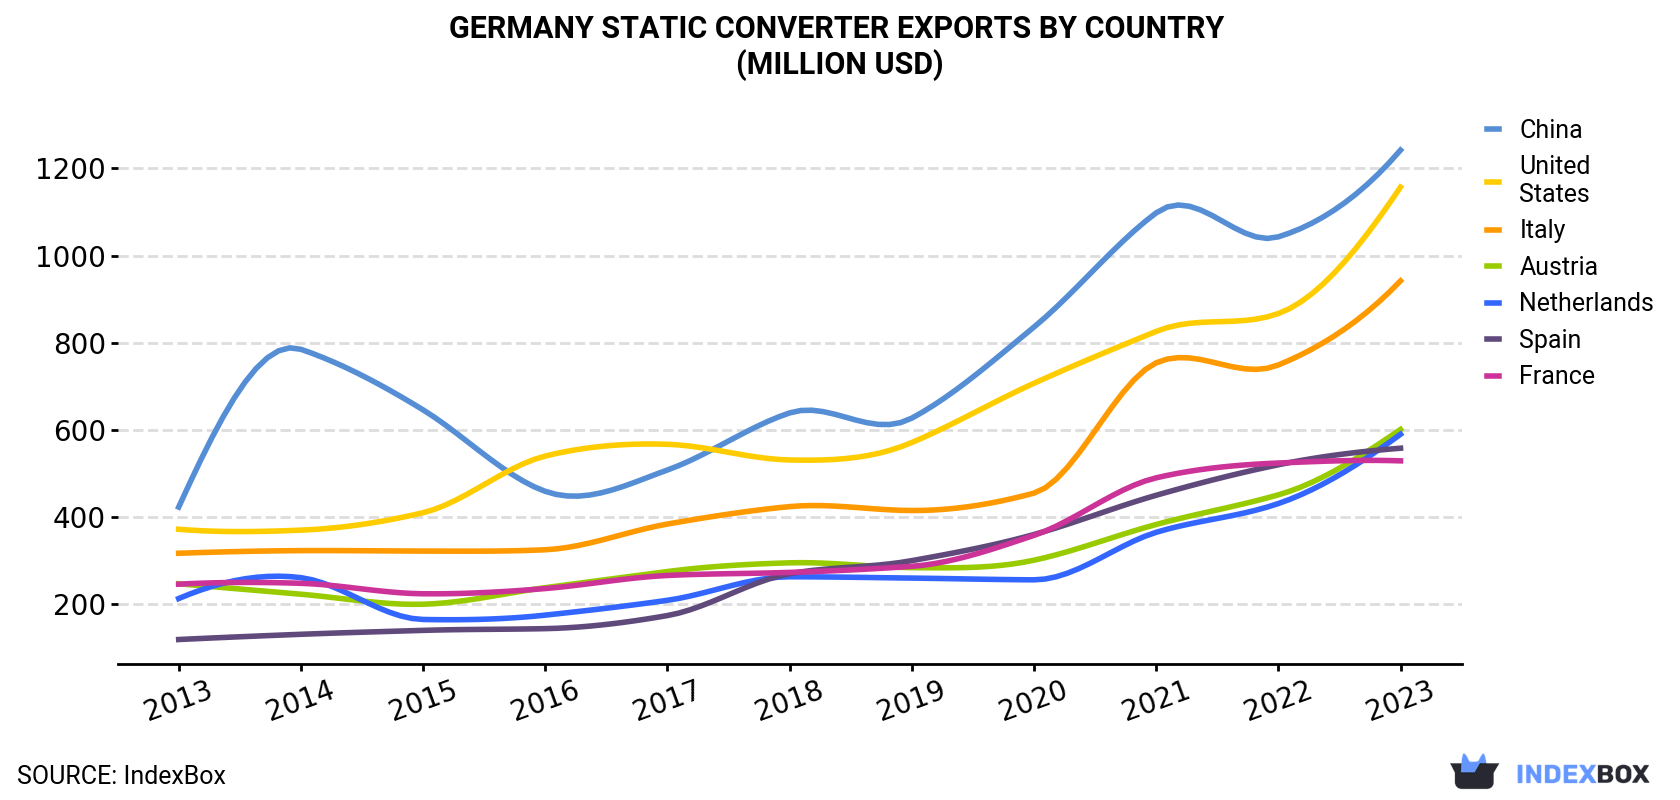 Germany Static Converter Exports By Country (Million USD)